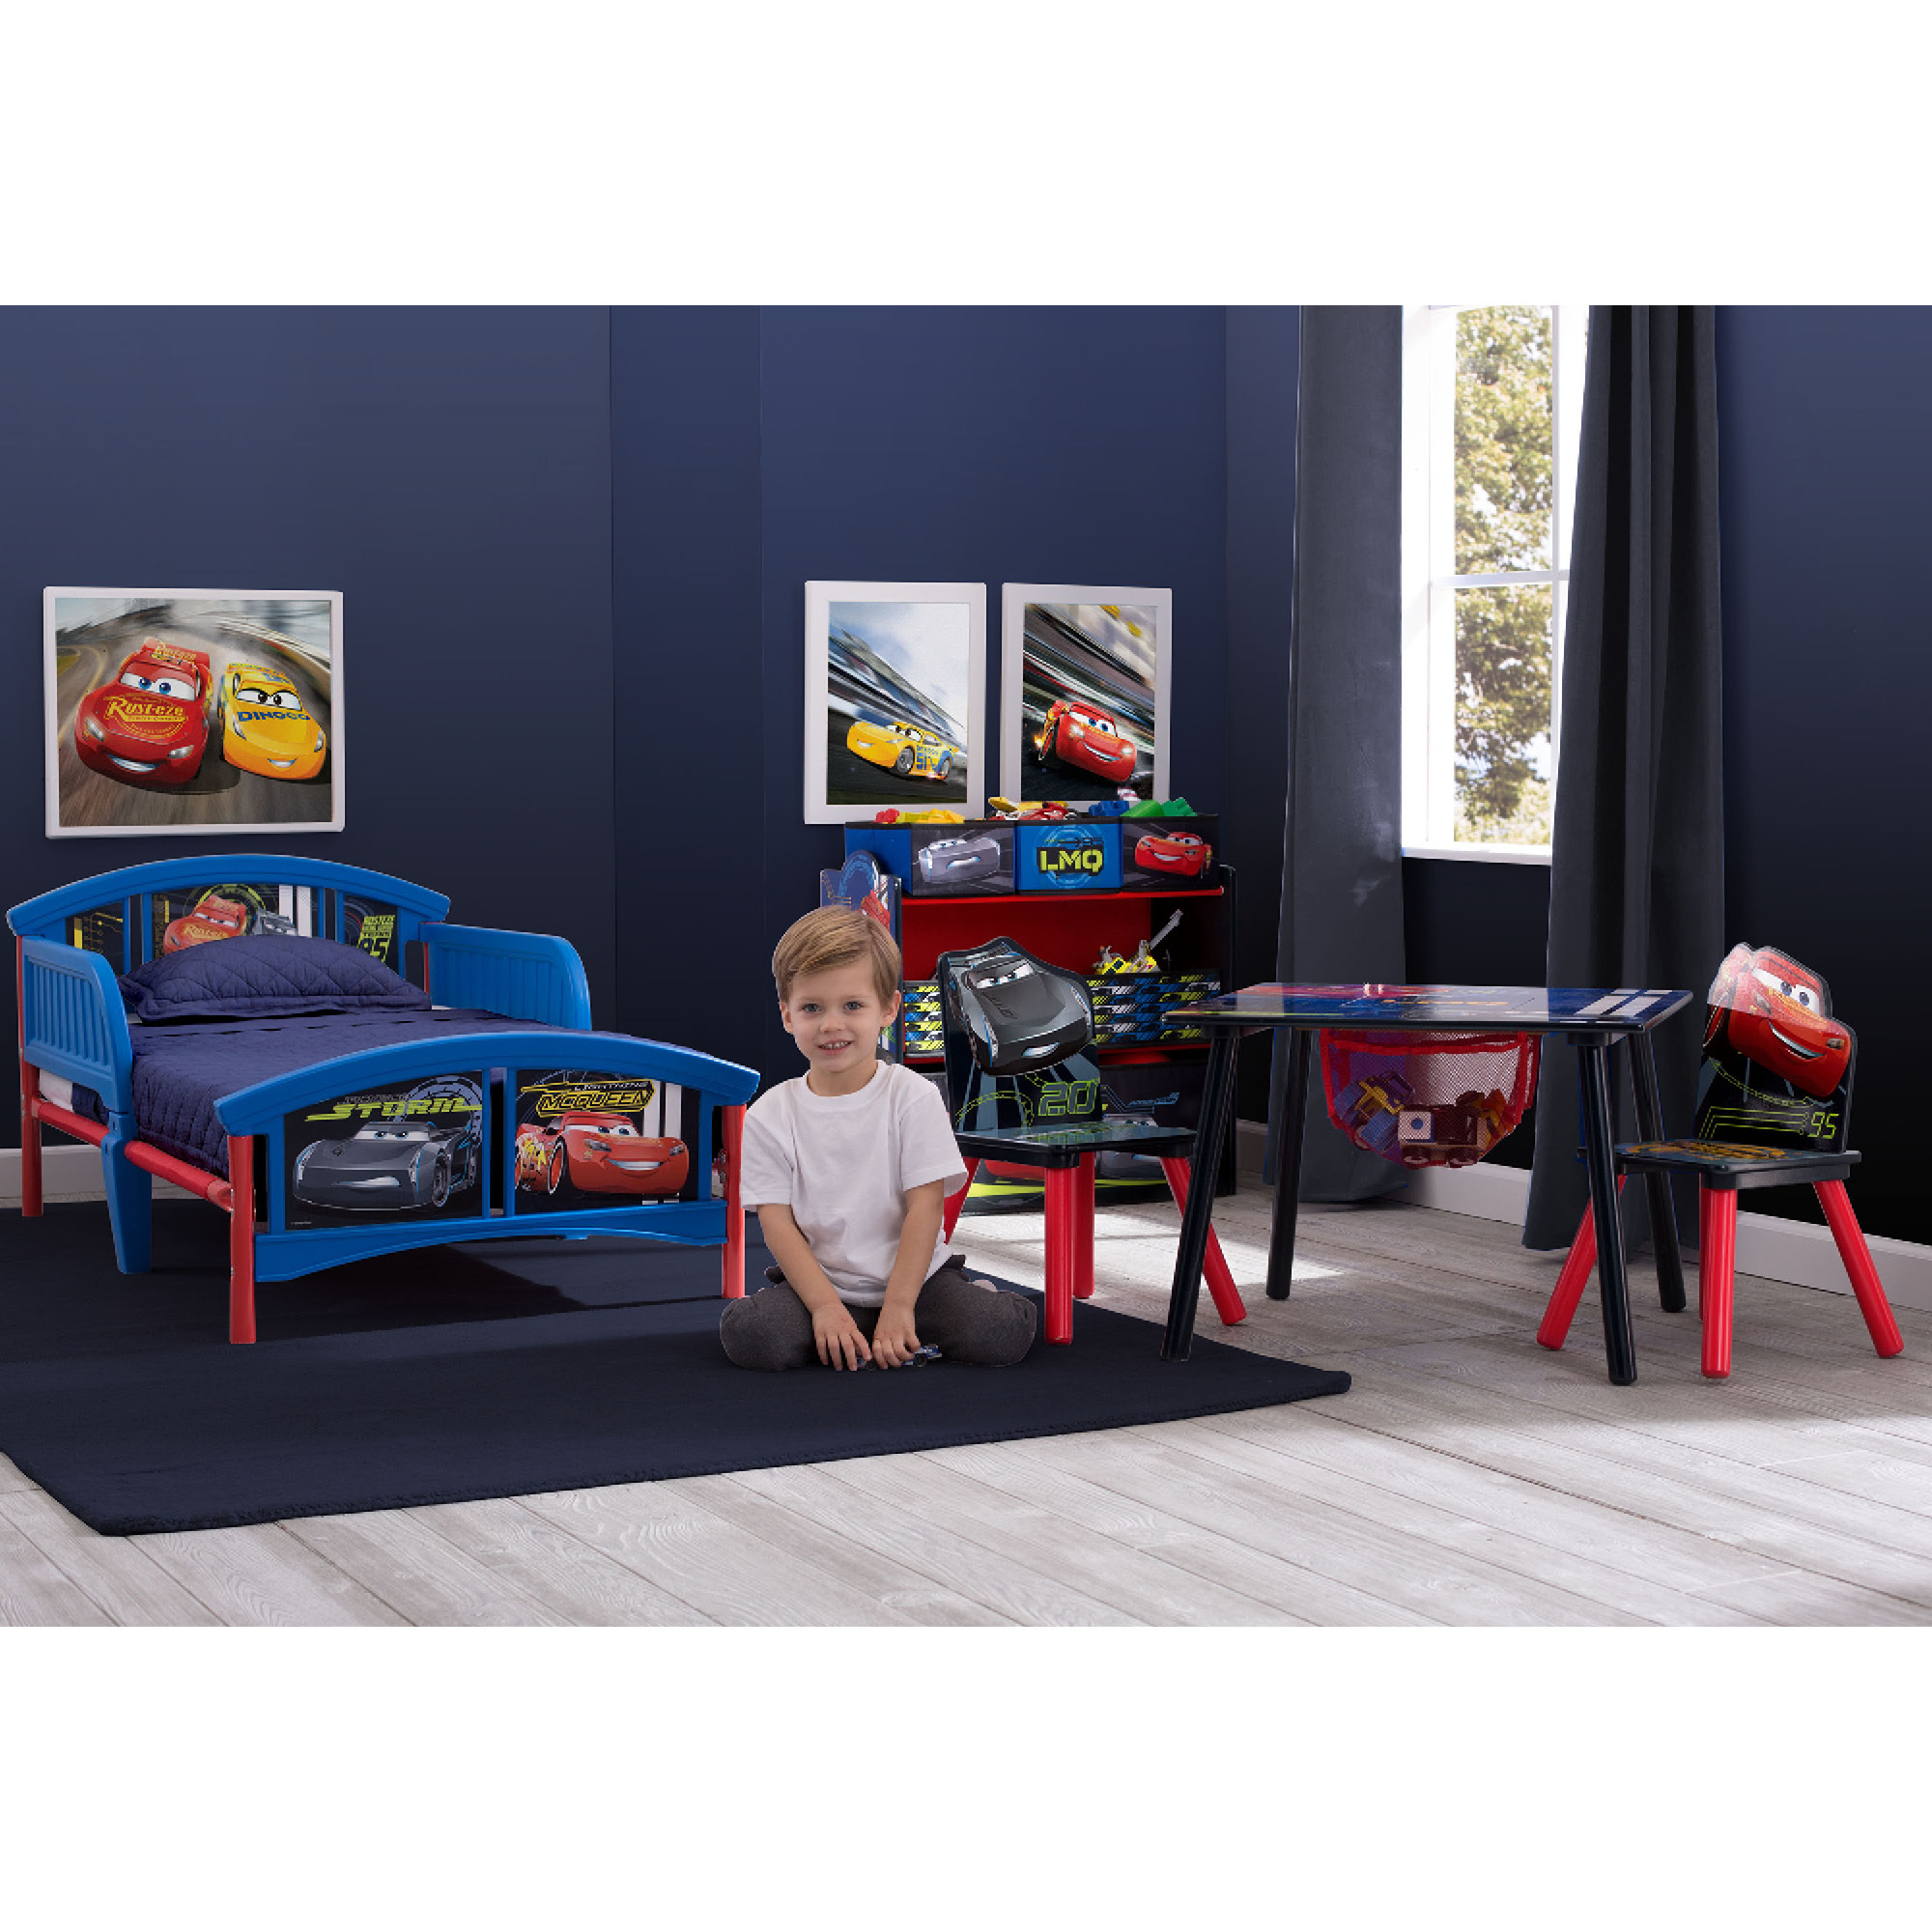 Disney Pixar Cars 6 Bin Design and Store Toy Organizer by Delta Children - Durable Engineered Wood, Solid Wood and Fabric Construction, Black/Multi Color - image 4 of 12